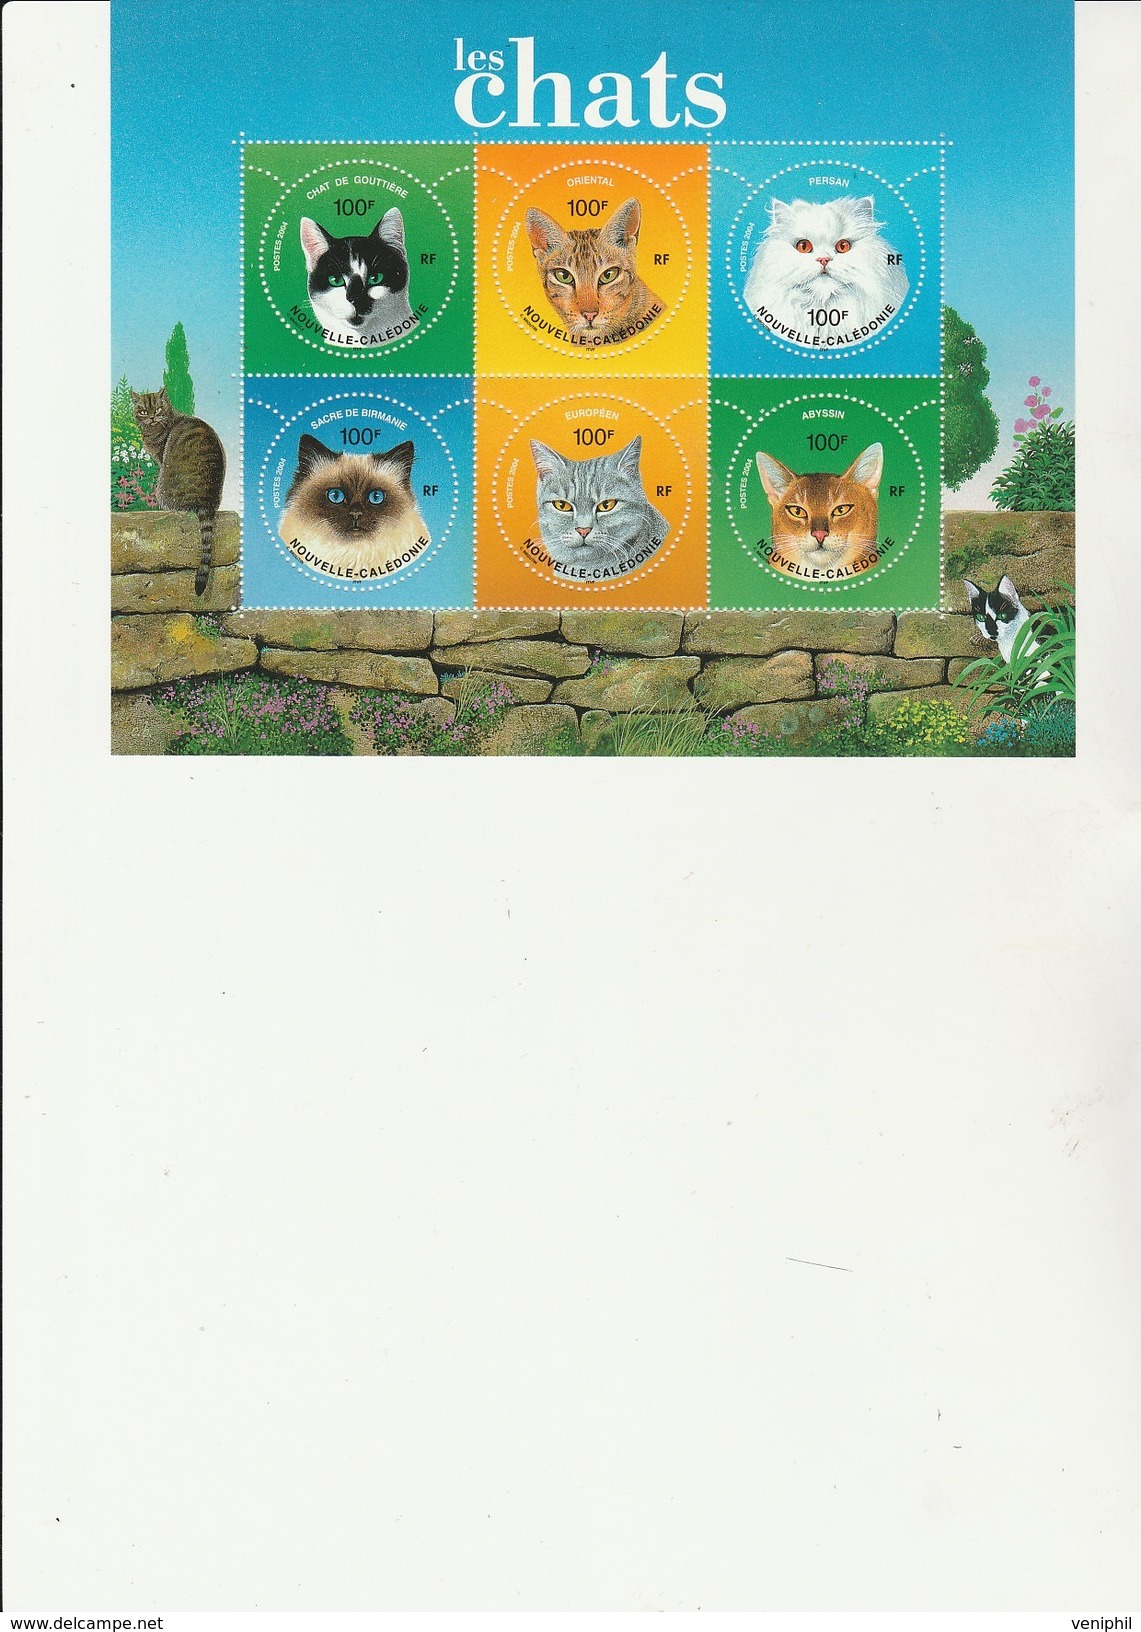 NOUVELLE- CALEDONIE - BLOC FEUILLET TIMBRES N° 923 A 928  NEUF XX  ANNEE 2004  - THEMATIQUE CHATS - Blocks & Sheetlets